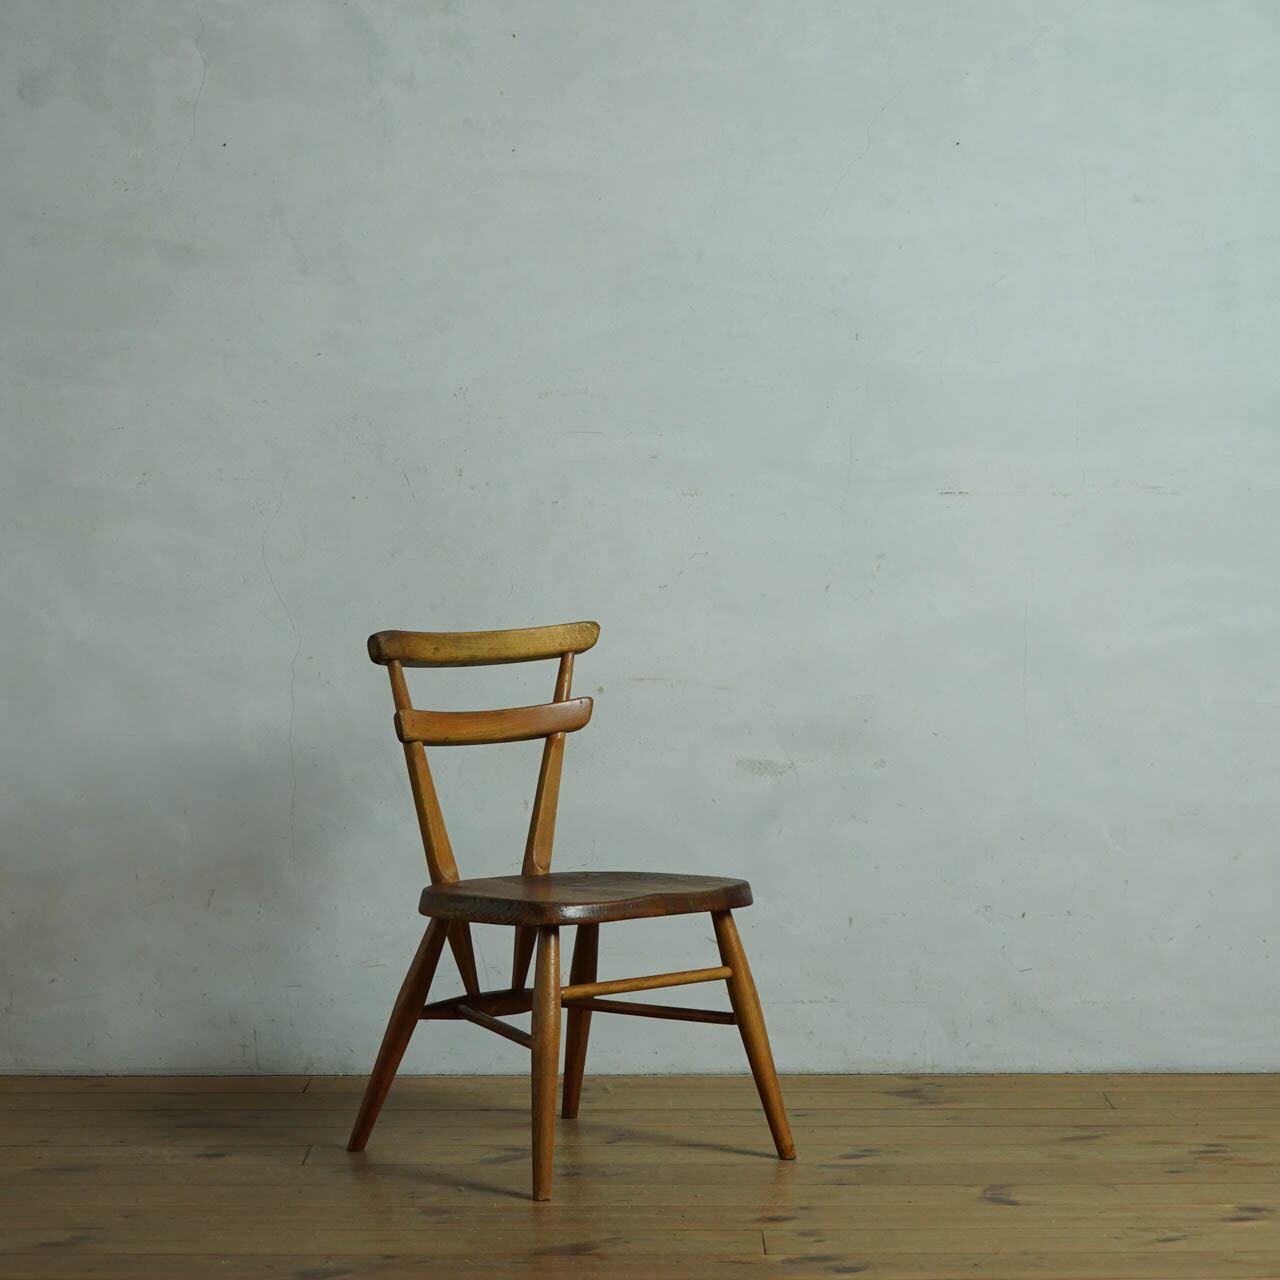 Ercol Stacking School Chair / アーコール スタッキングスクール チェア  【A】〈椅子・スクールチェア・キッズチェア・アンティーク・ヴィンテージ・店舗什器〉112573 | SHABBY'S MARKETPLACE　 アンティーク・ヴィンテージ 家具や雑貨のお店